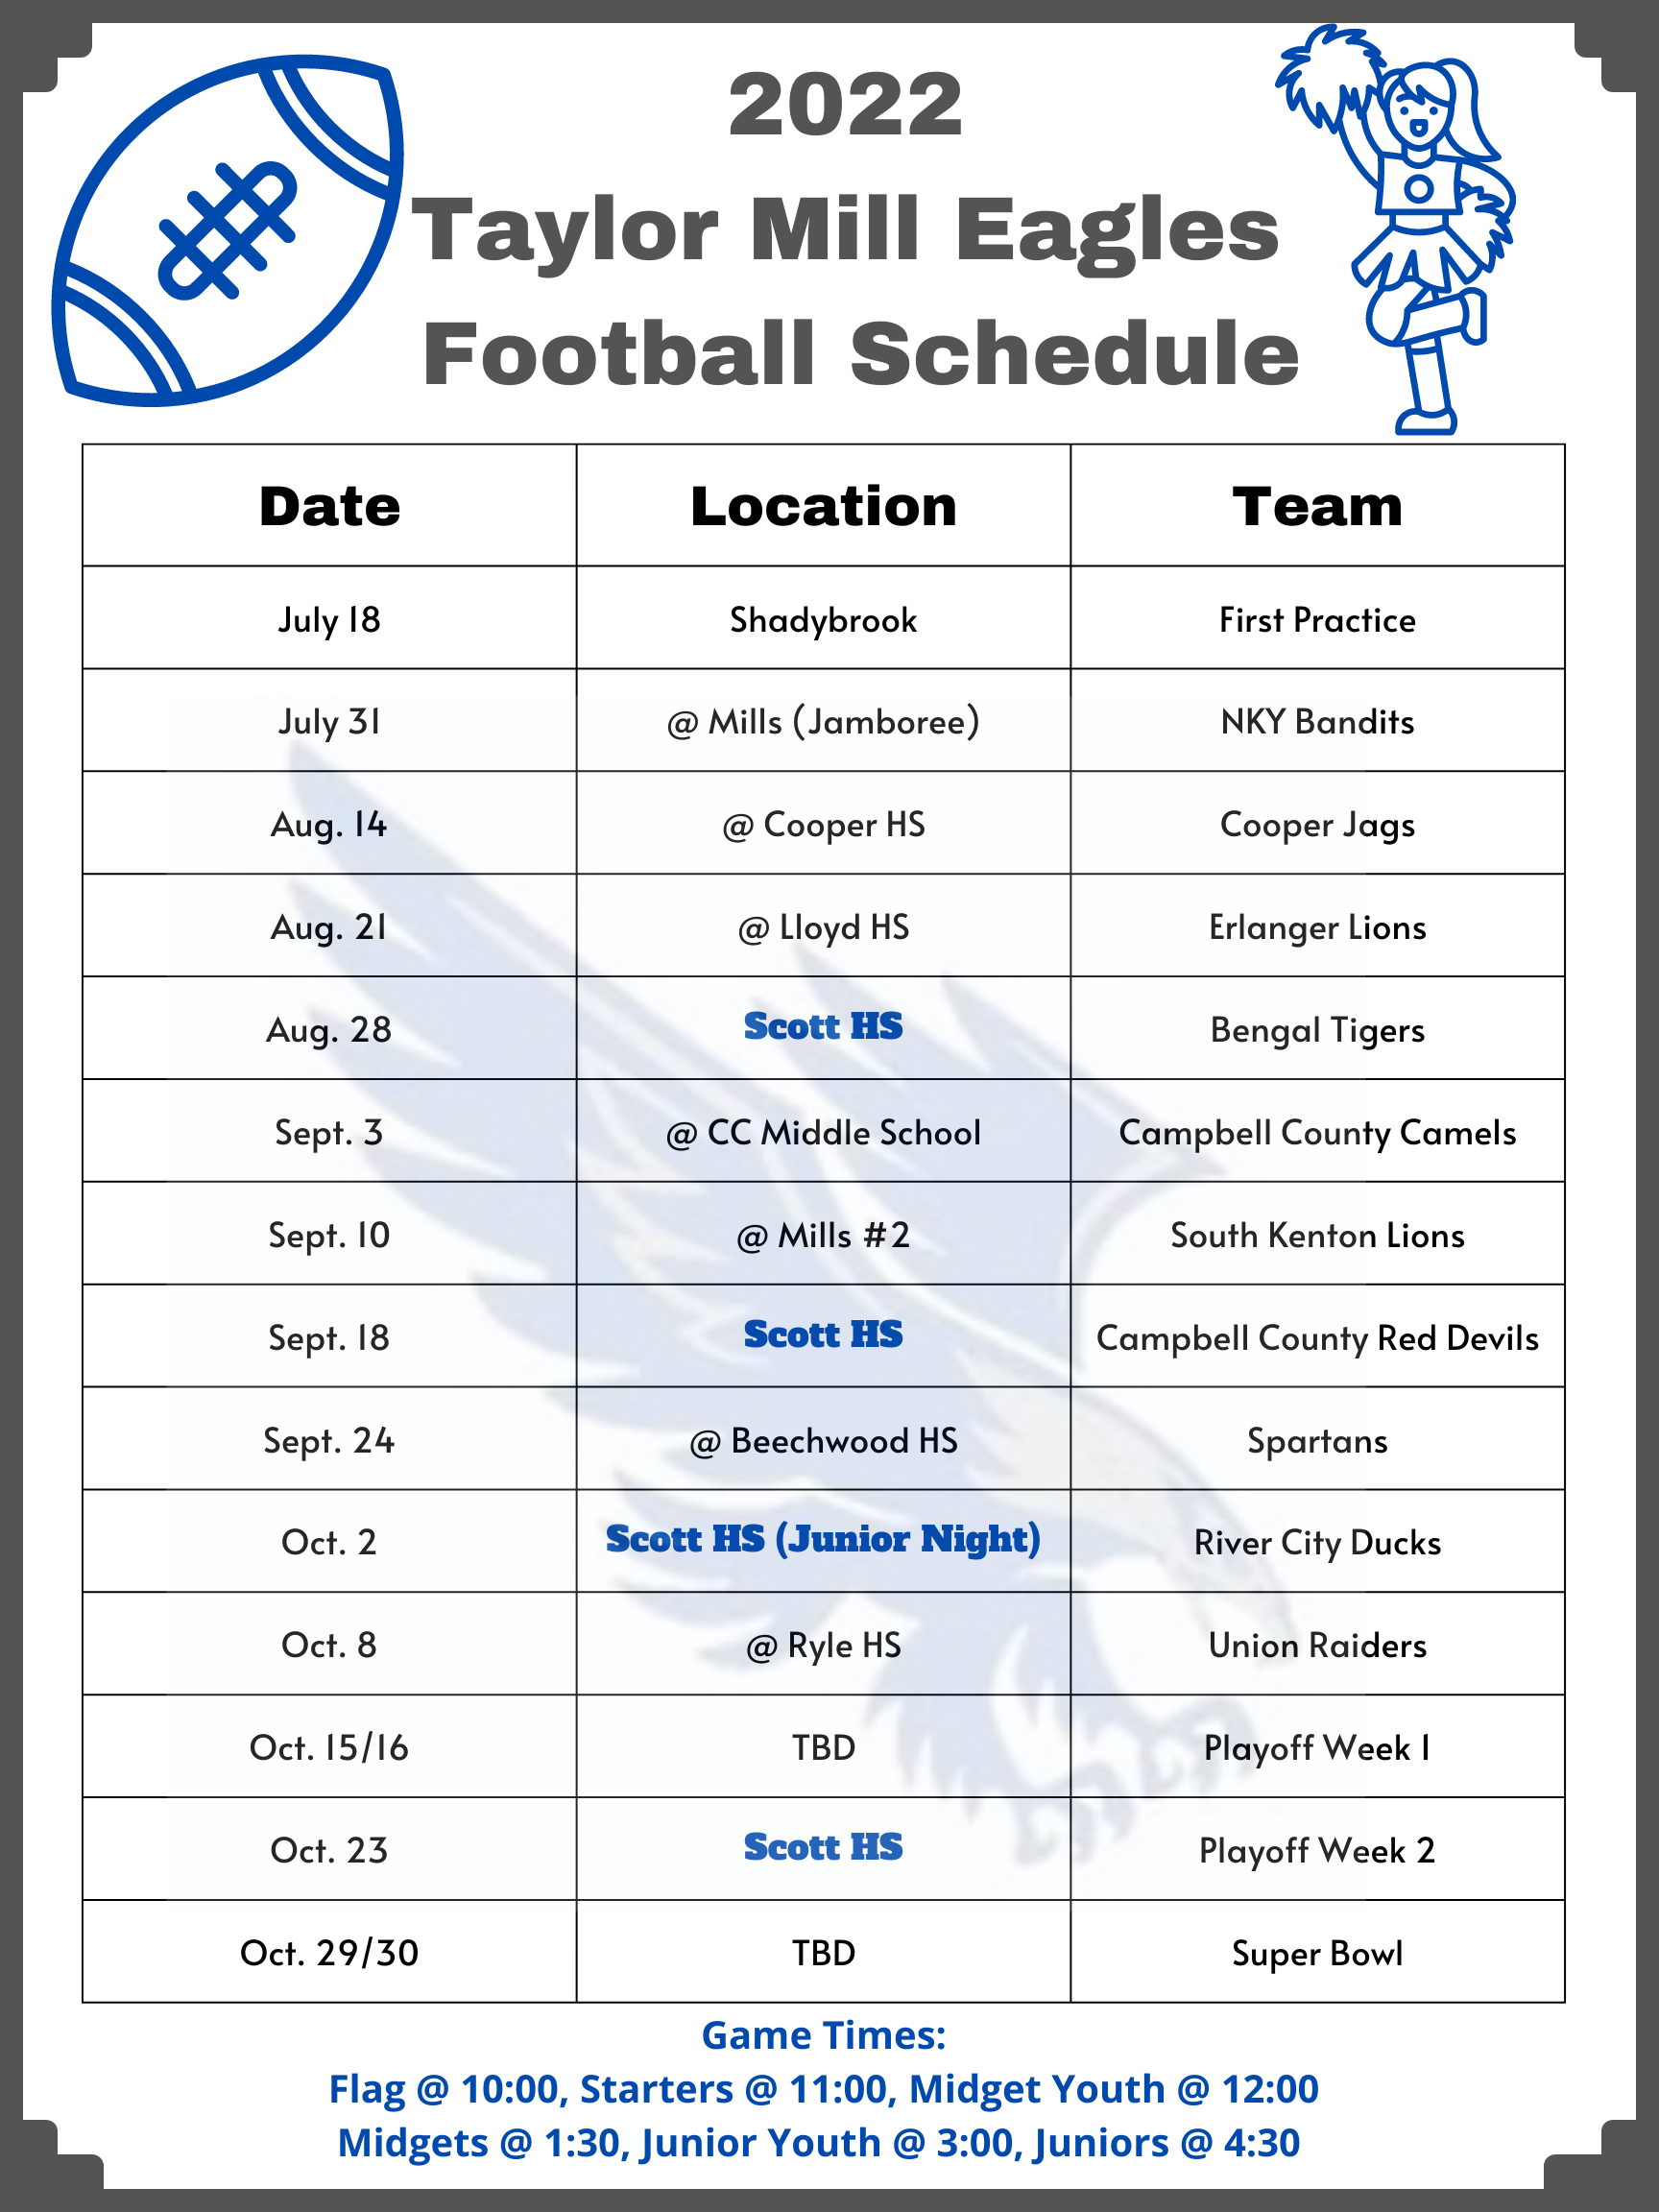 2022 Taylor Mill Eagles Schedule!